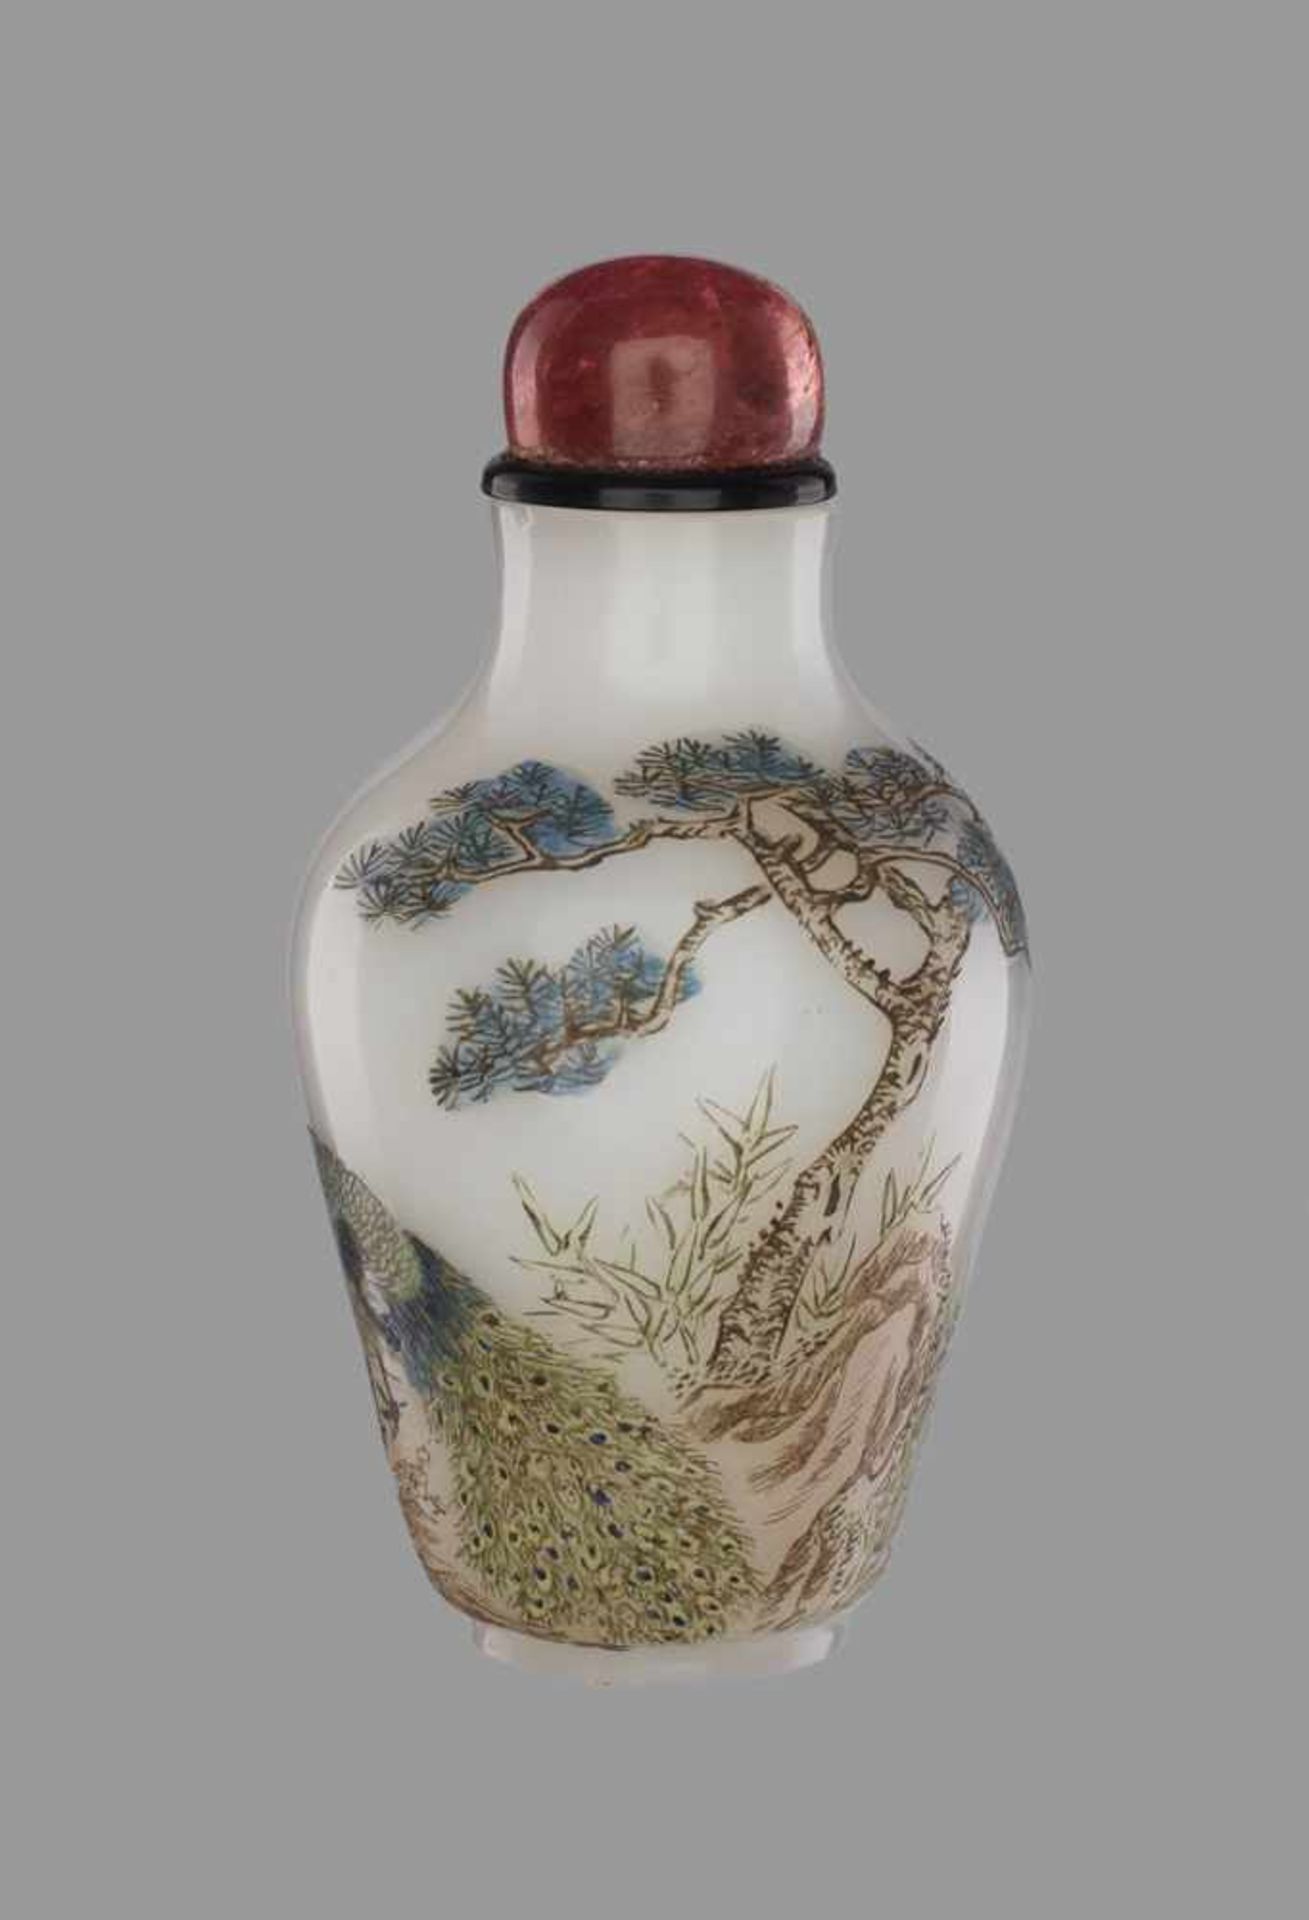 A GUYUE XUAN ‘PEACOCK’ ENAMELED GLASS SNUFF BOTTLE WITH A ‘PEACH’ MARK White opaque glass with - Image 2 of 8